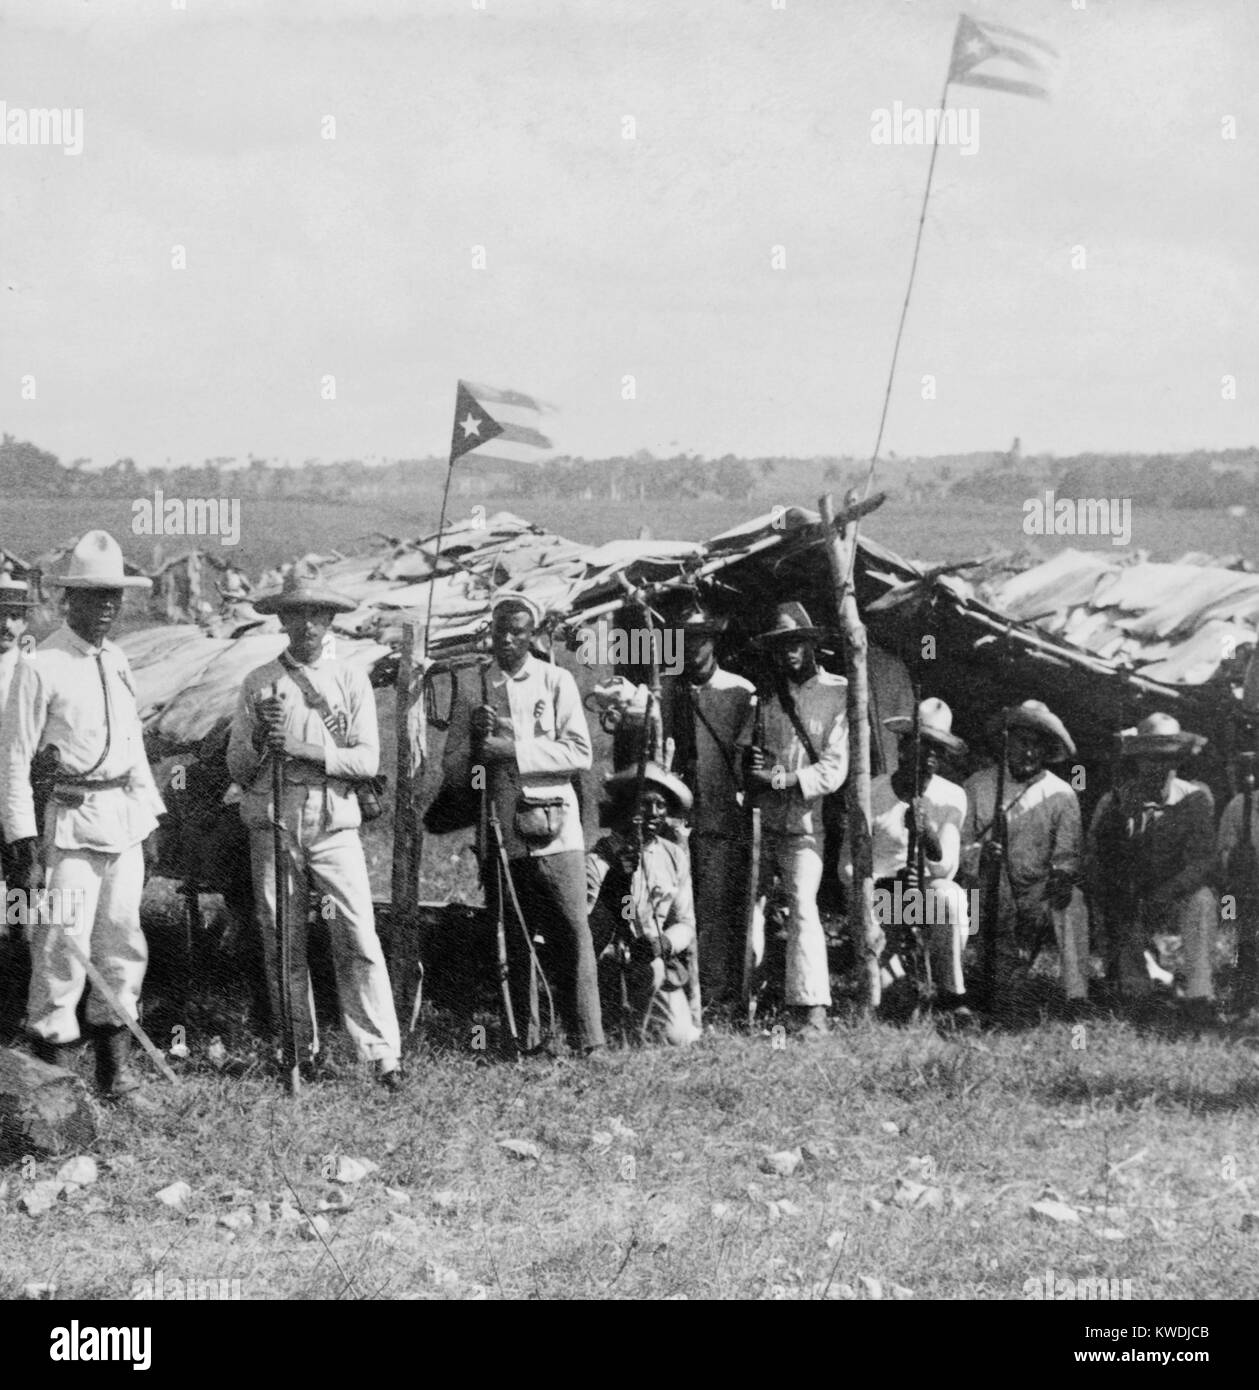 Uniformed Cuban soldiers in the field with their flag and weapons. The multi-racial group is at Guanabacoa, east of Havana, ca. 1899 (BSLOC 2017 10 43) Stock Photo